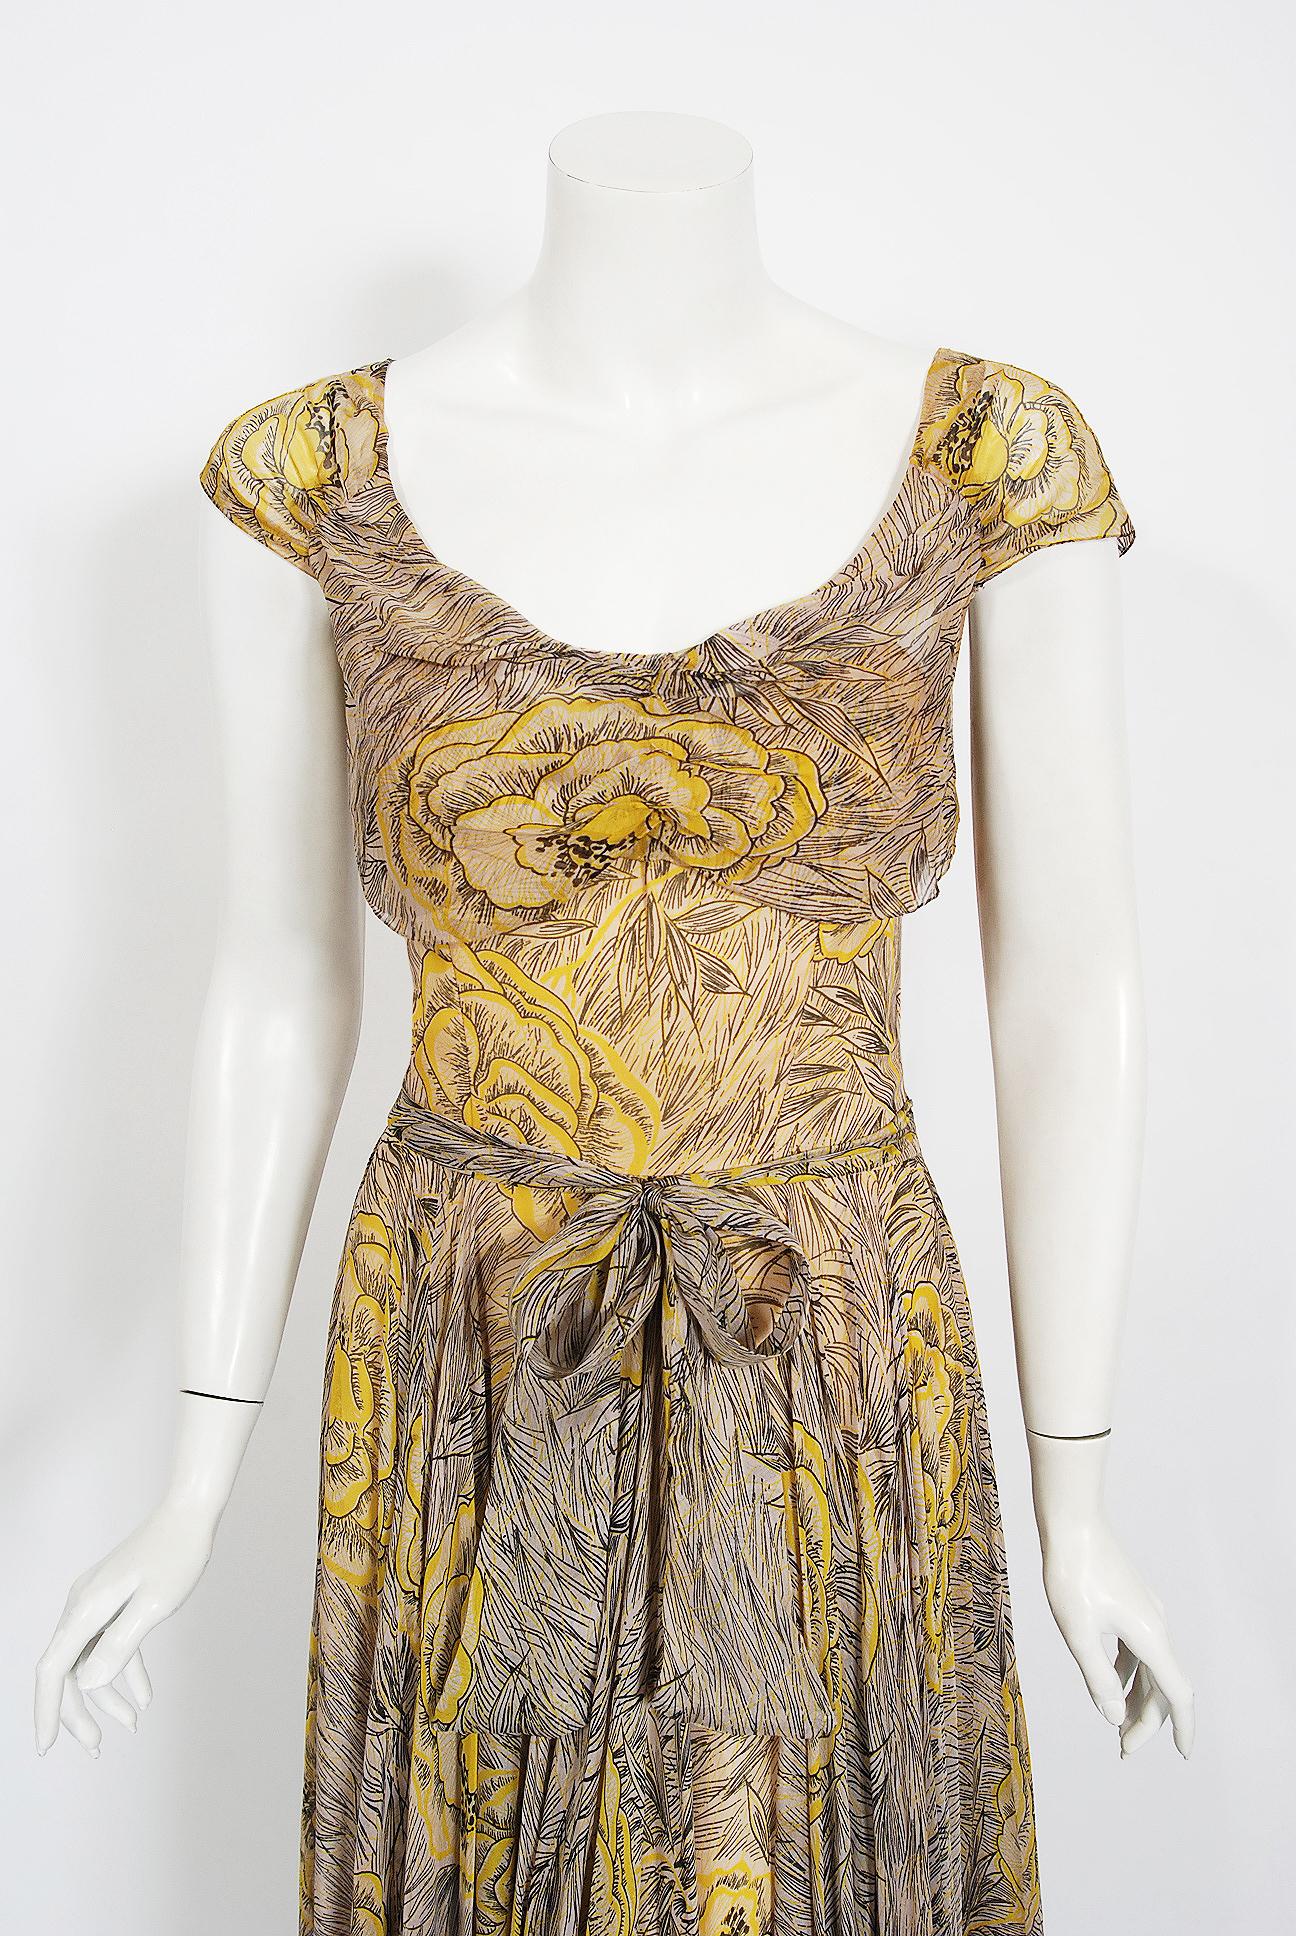 Breathtaking 1940's yellow-roses print garden gown by the highly adored 